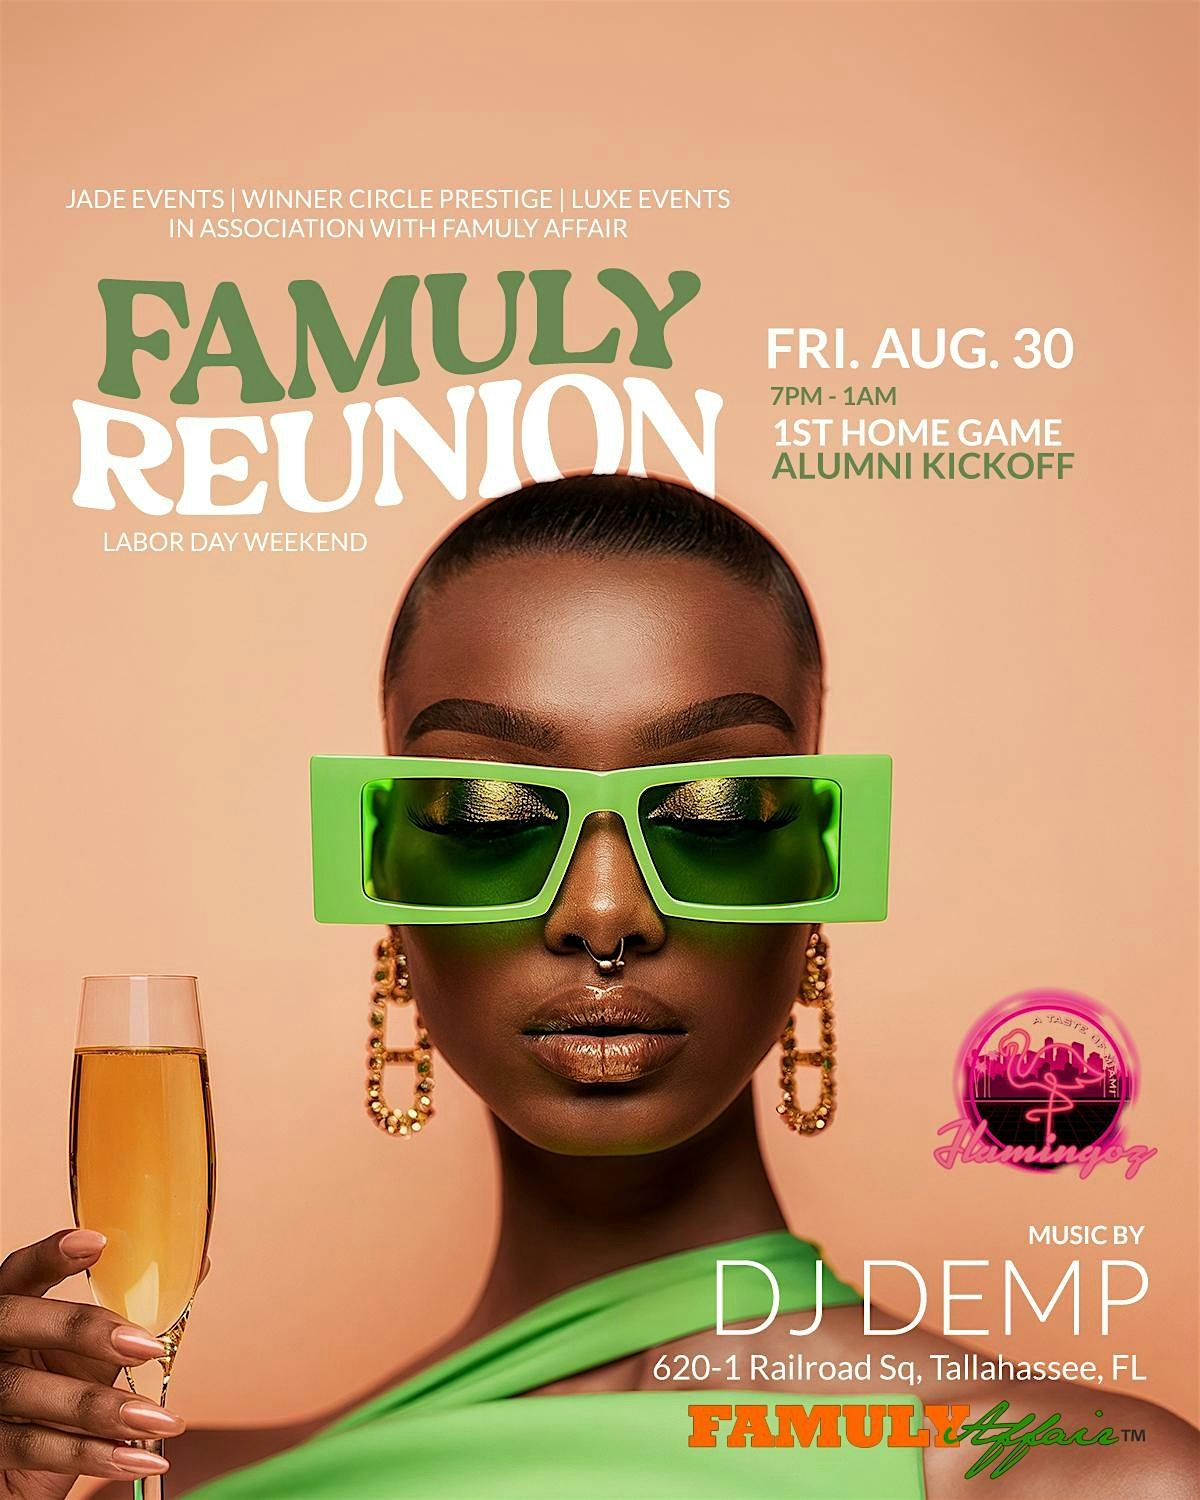 FAMULY REUNION - Labor Day Weekend - 1st Home Game Alumni Kickoff